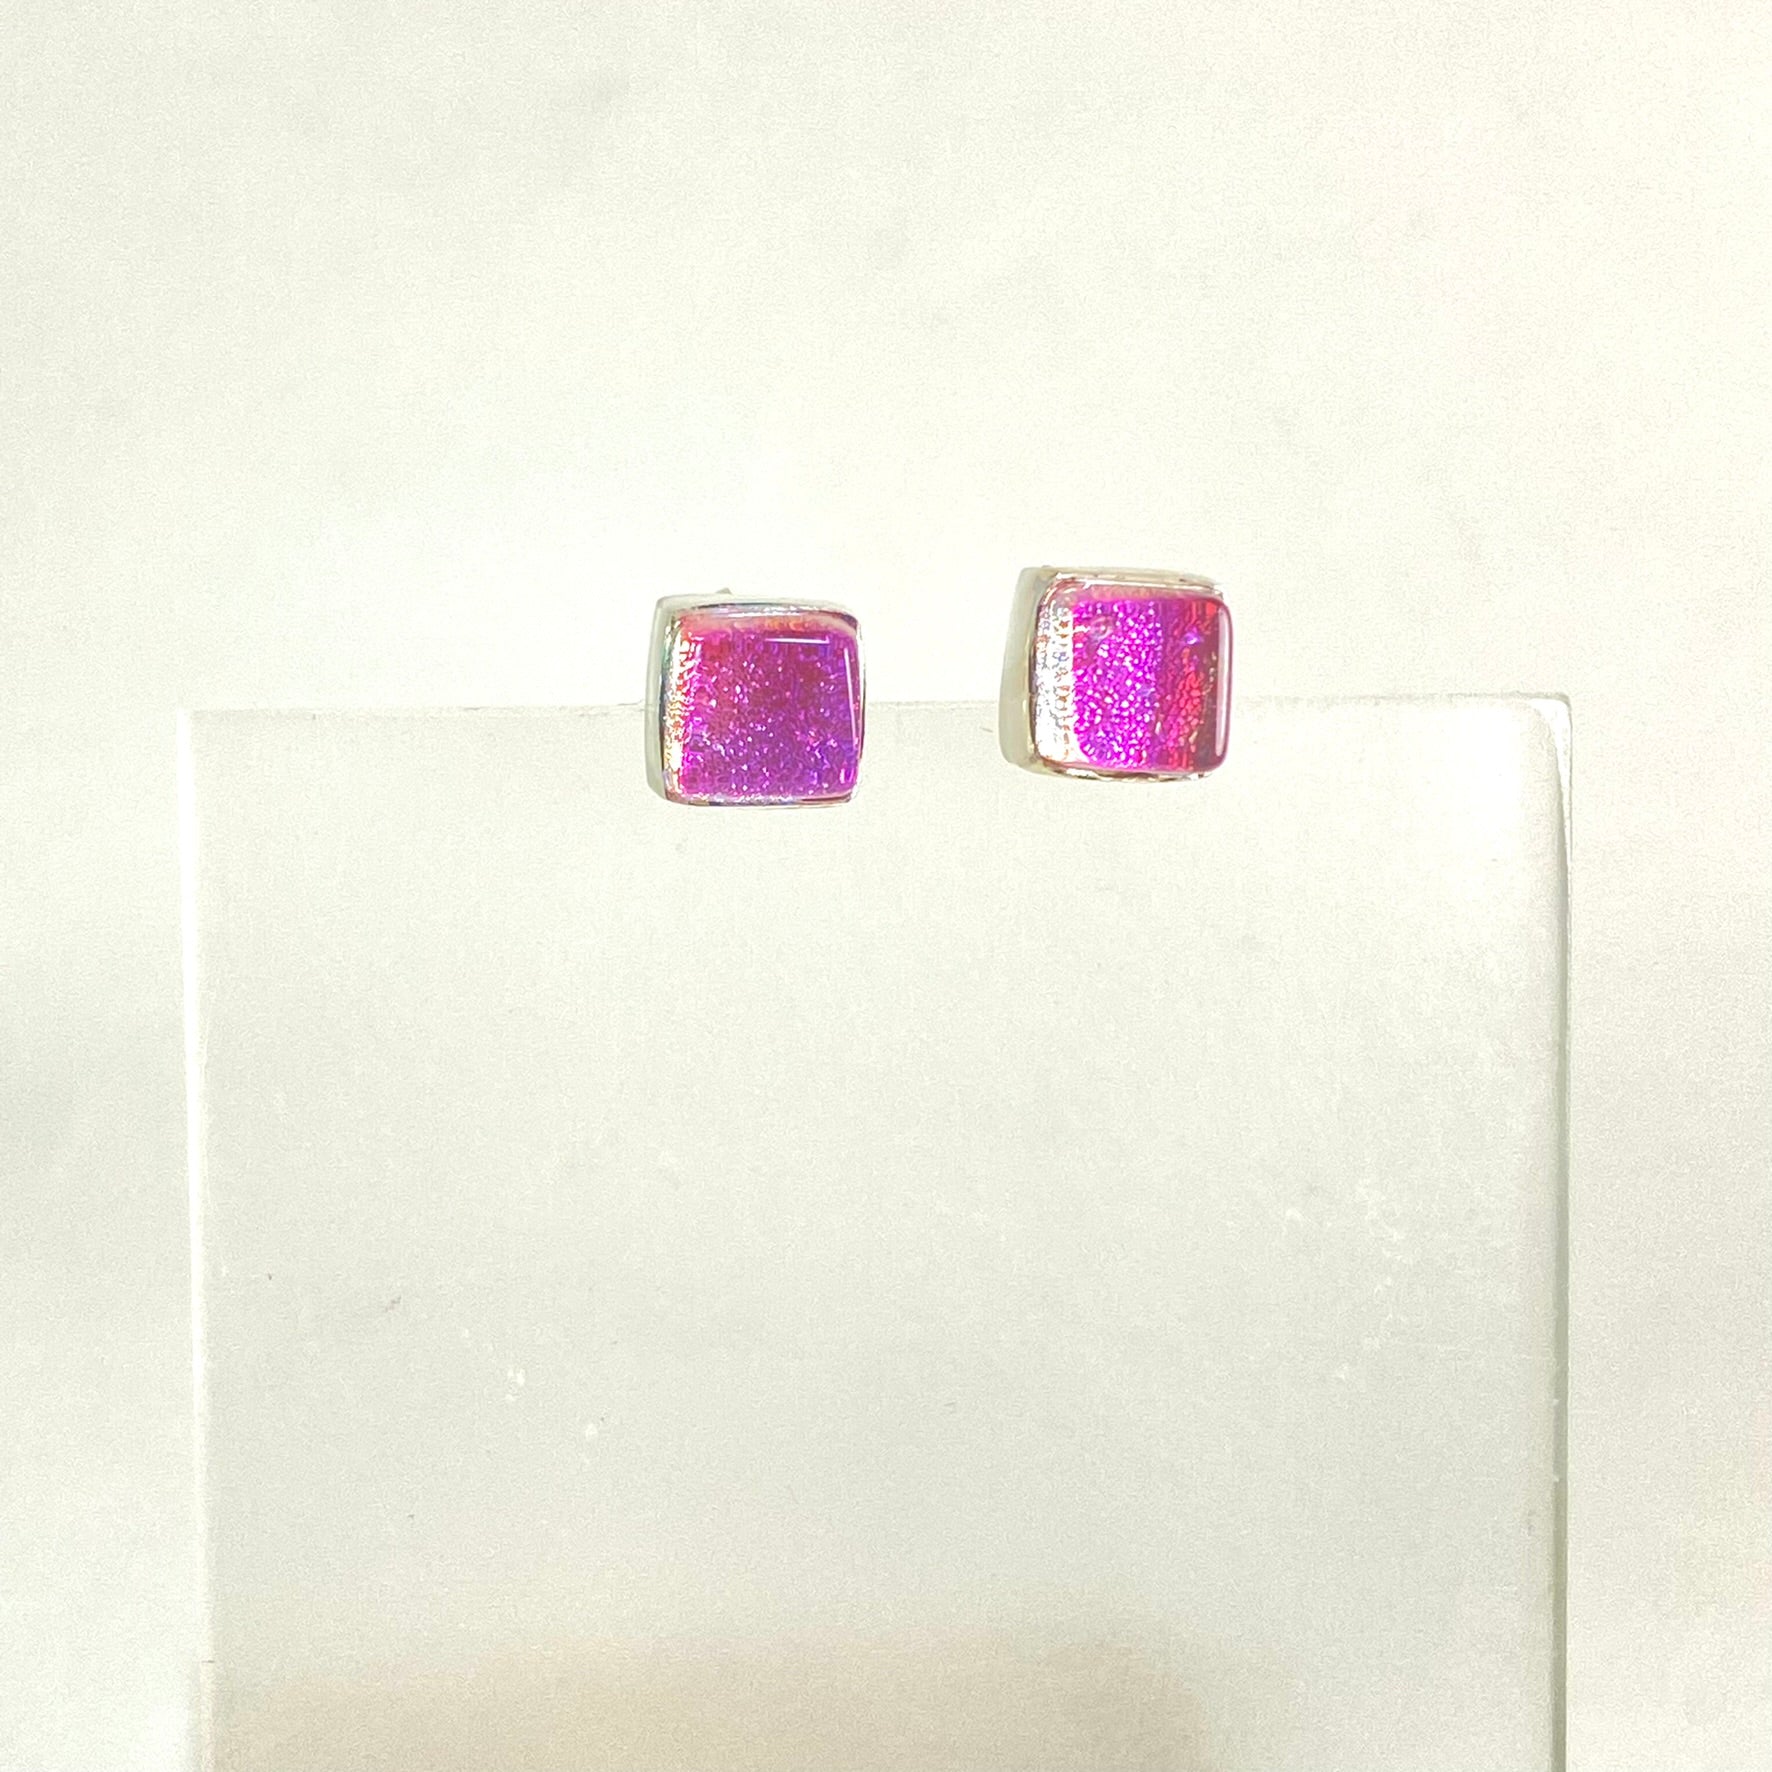 Square Post Earrings in Cotton Candy